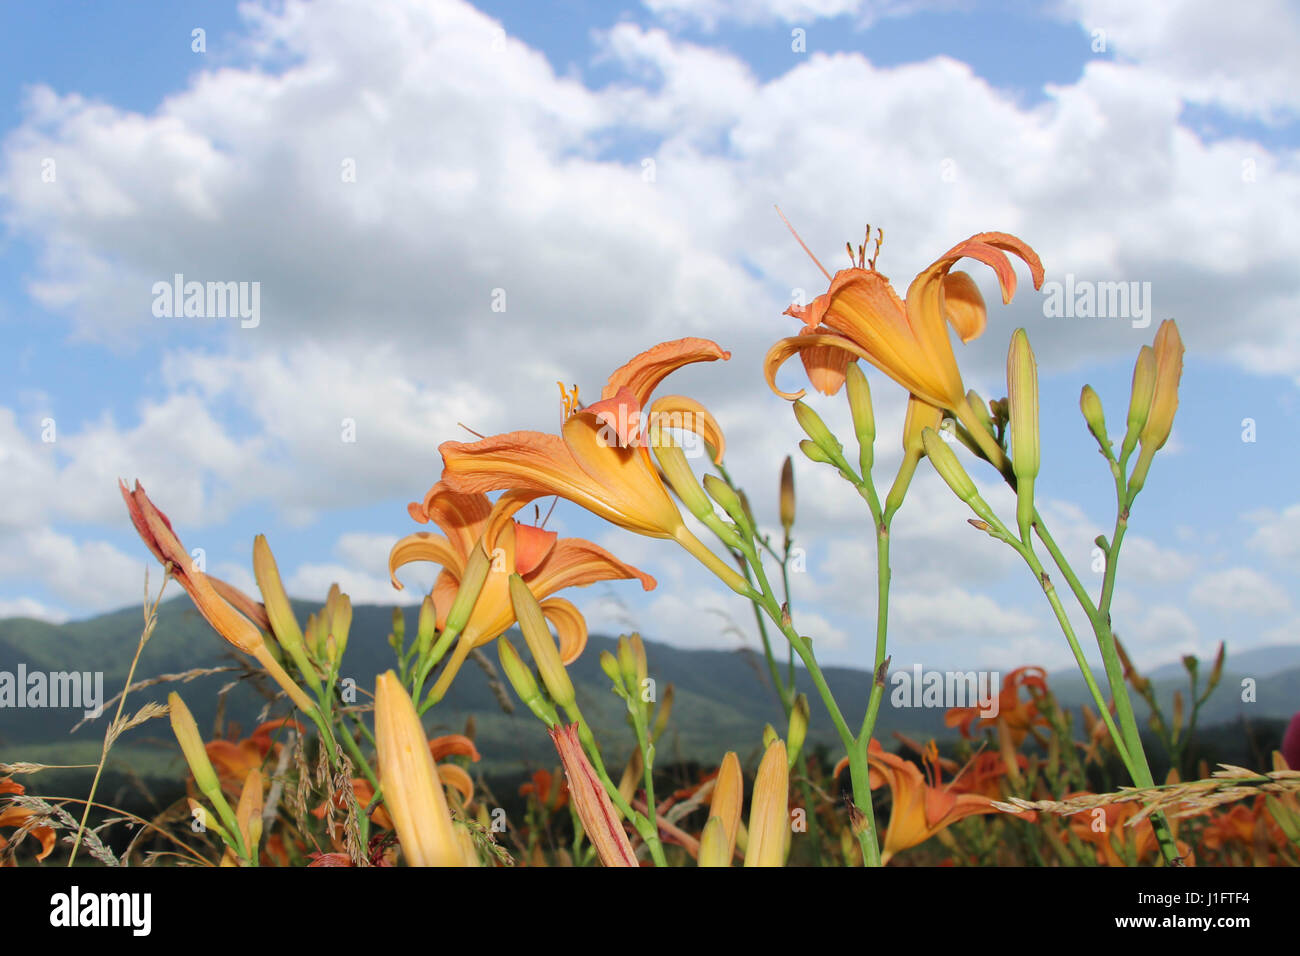 Field of Lillies with Blue Sky and White Clouds in Background Stock Photo